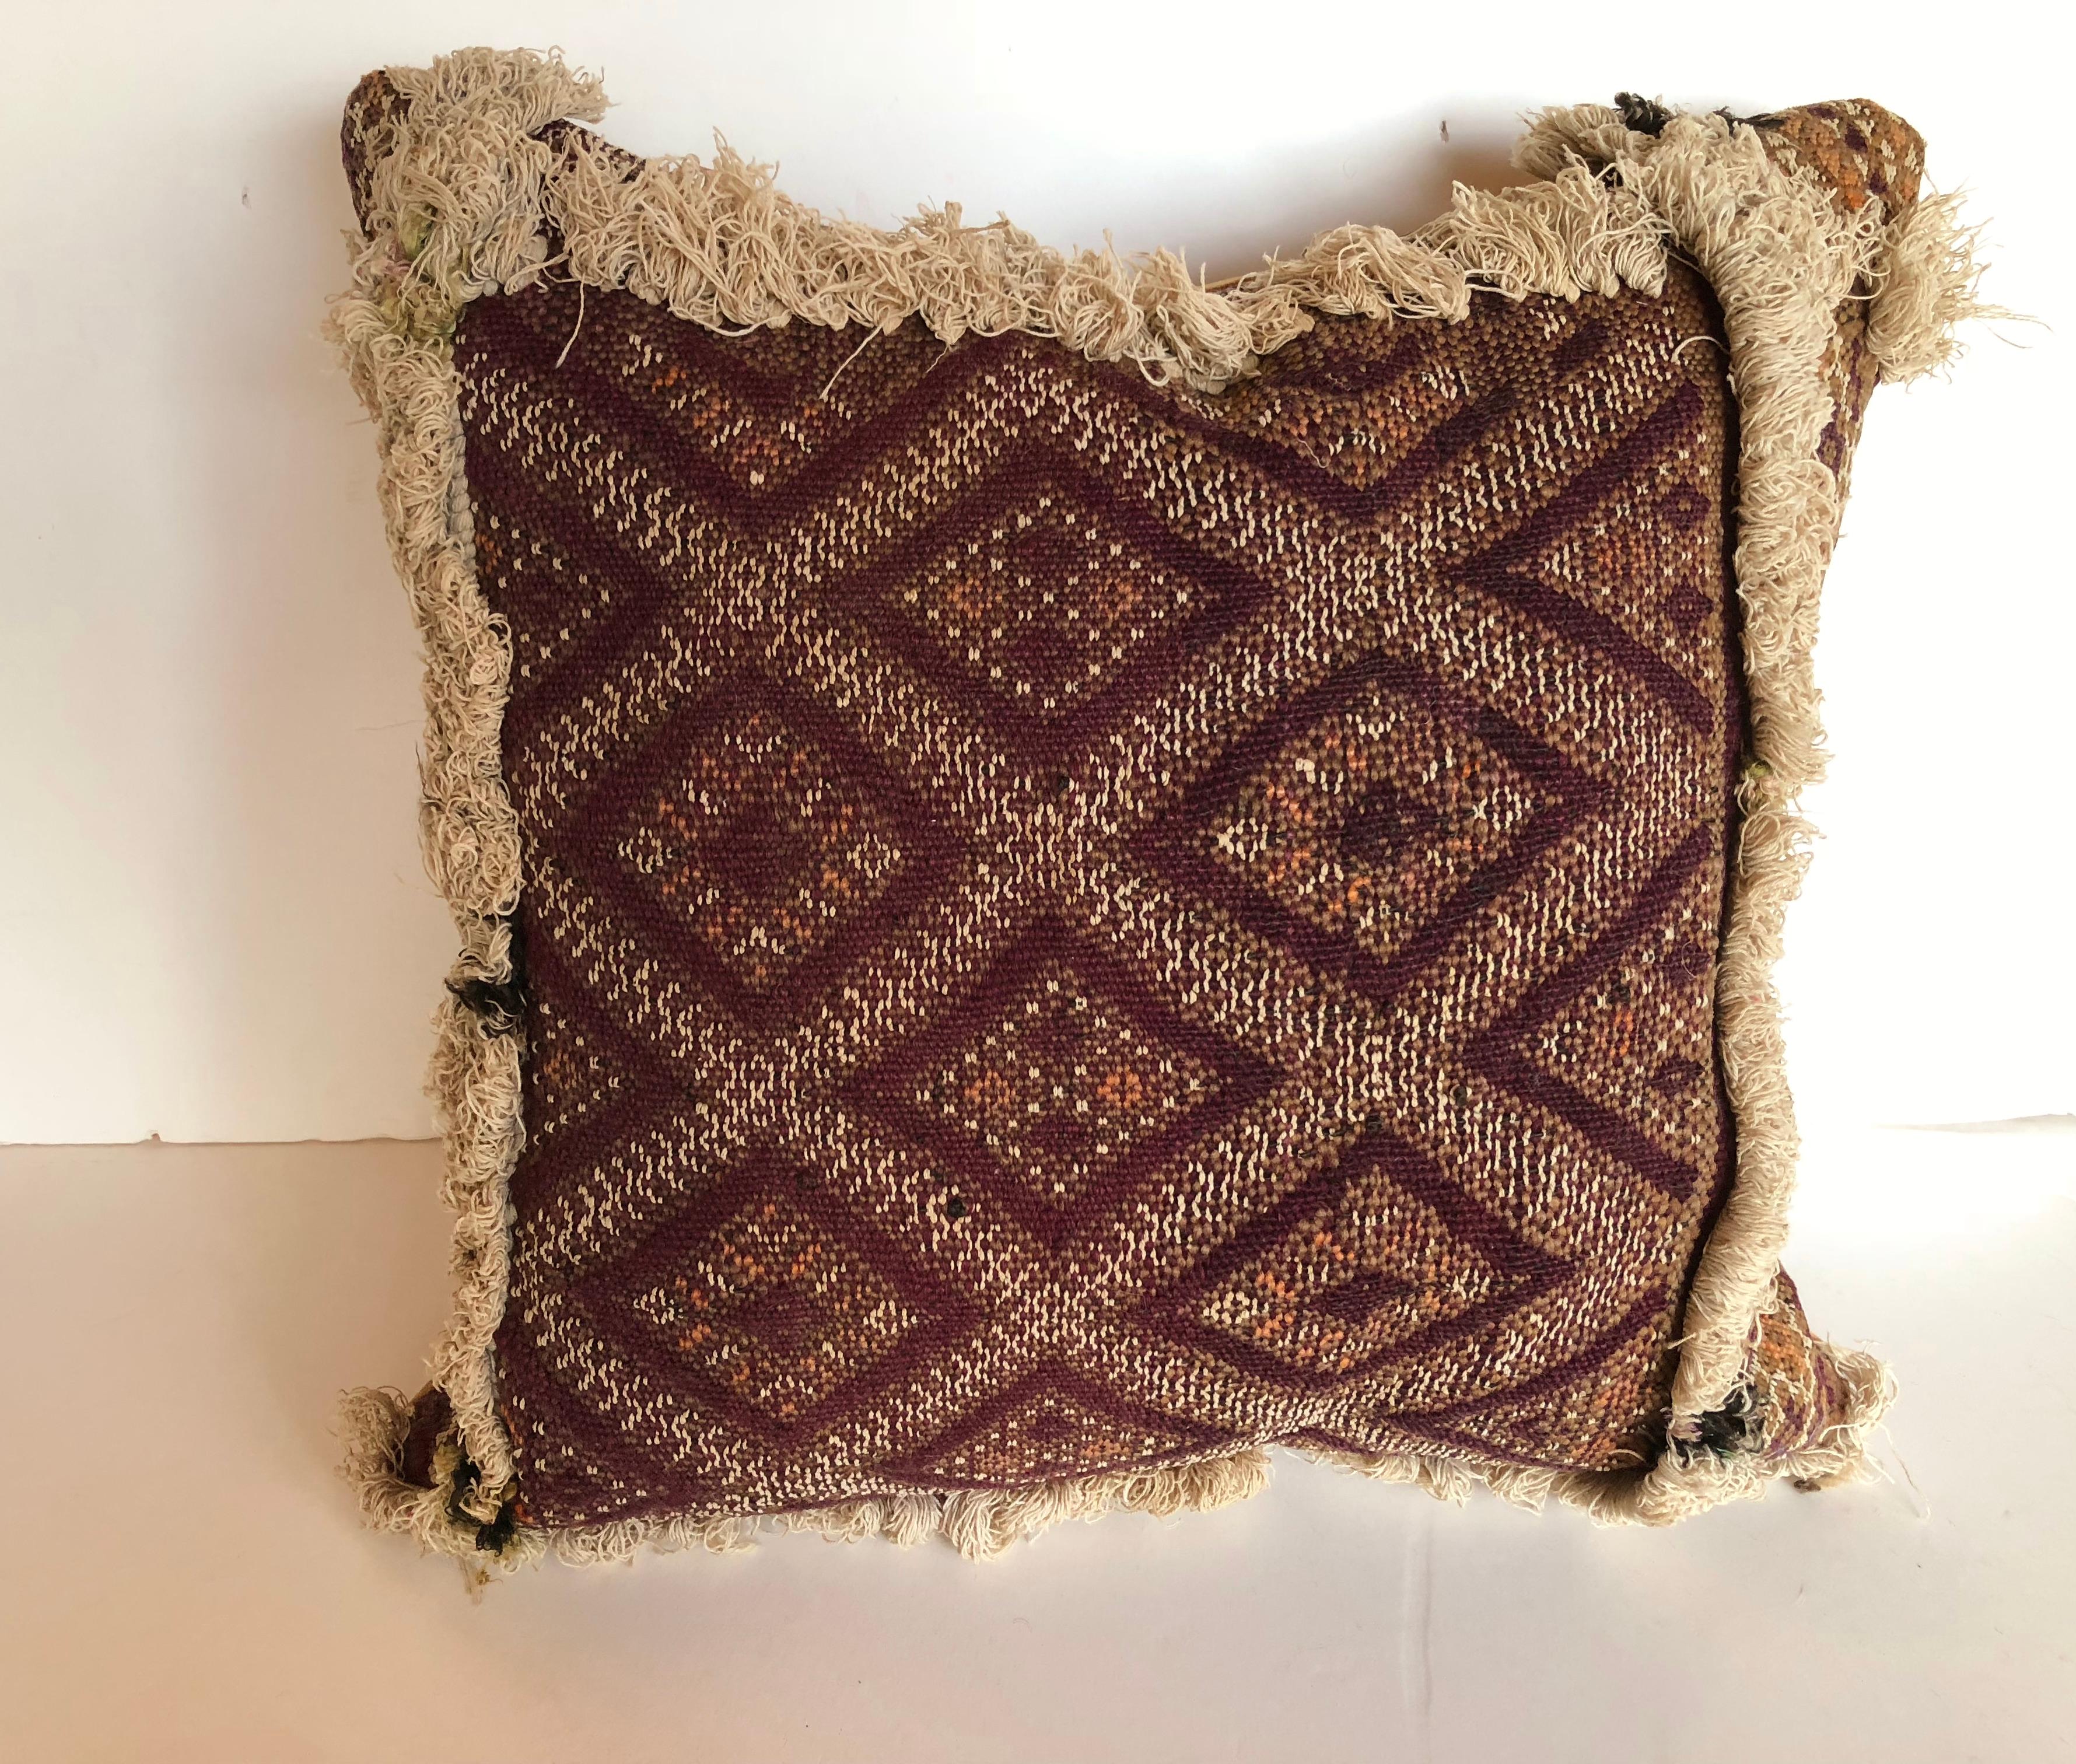 Custom pillow cut from a 100 year old hand loomed wool antique Moroccan rug from the Atlas Mountains. Each panel on the 20 ft long rug was a different design separated by ivory tufting. Rich colors in purple, orange, brown and ivory. Pillow is